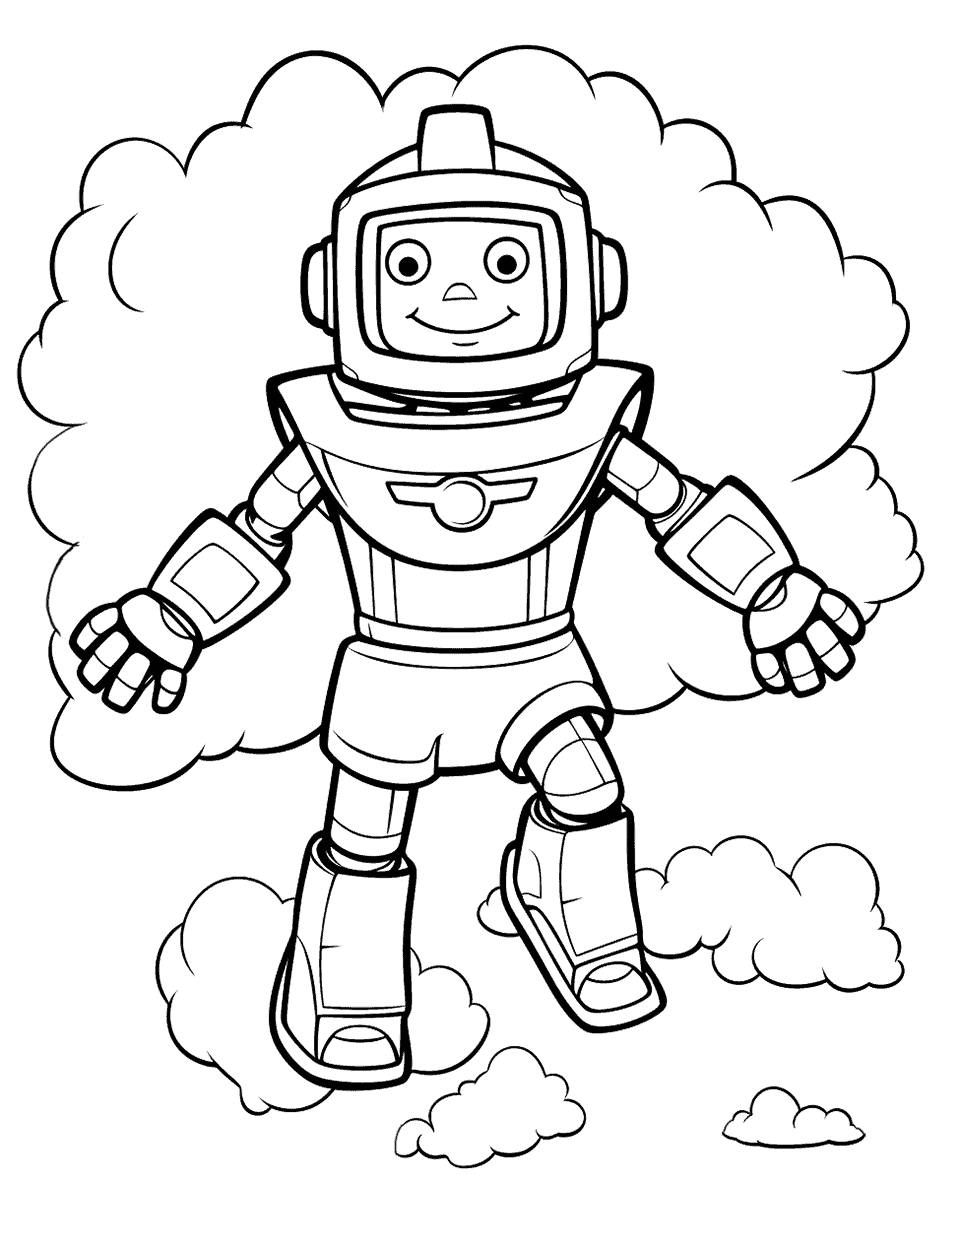 Superhero Robot Flying Coloring Page - A superhero robot soaring above the clouds.